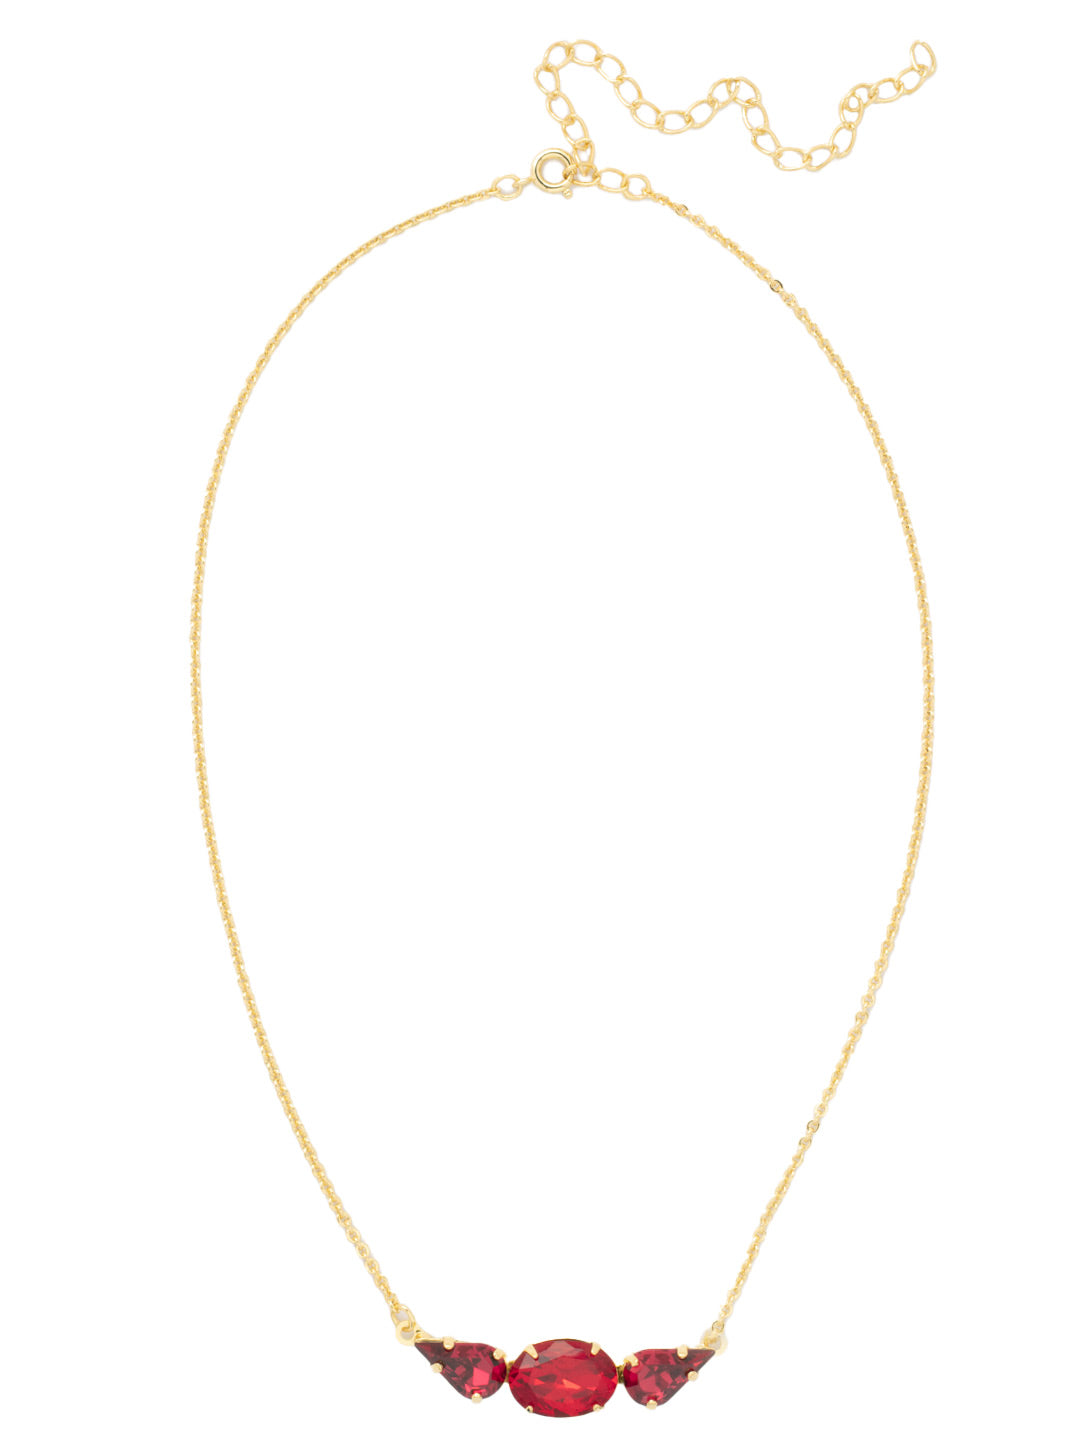 Oval and Pear Tennis Necklace - NFL14BGFIS